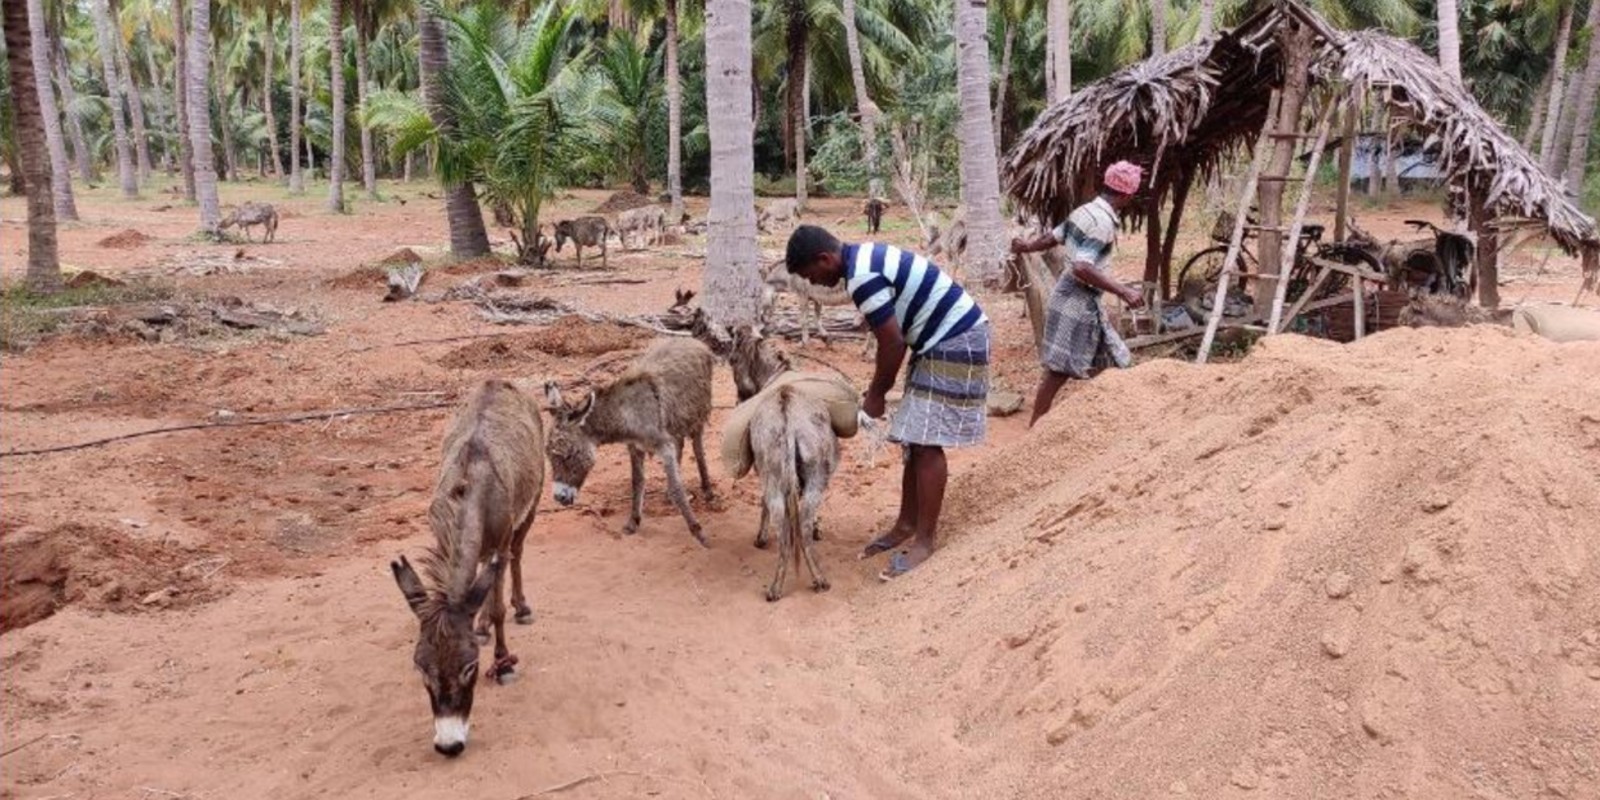 Working donkeys carrying burdens in South India